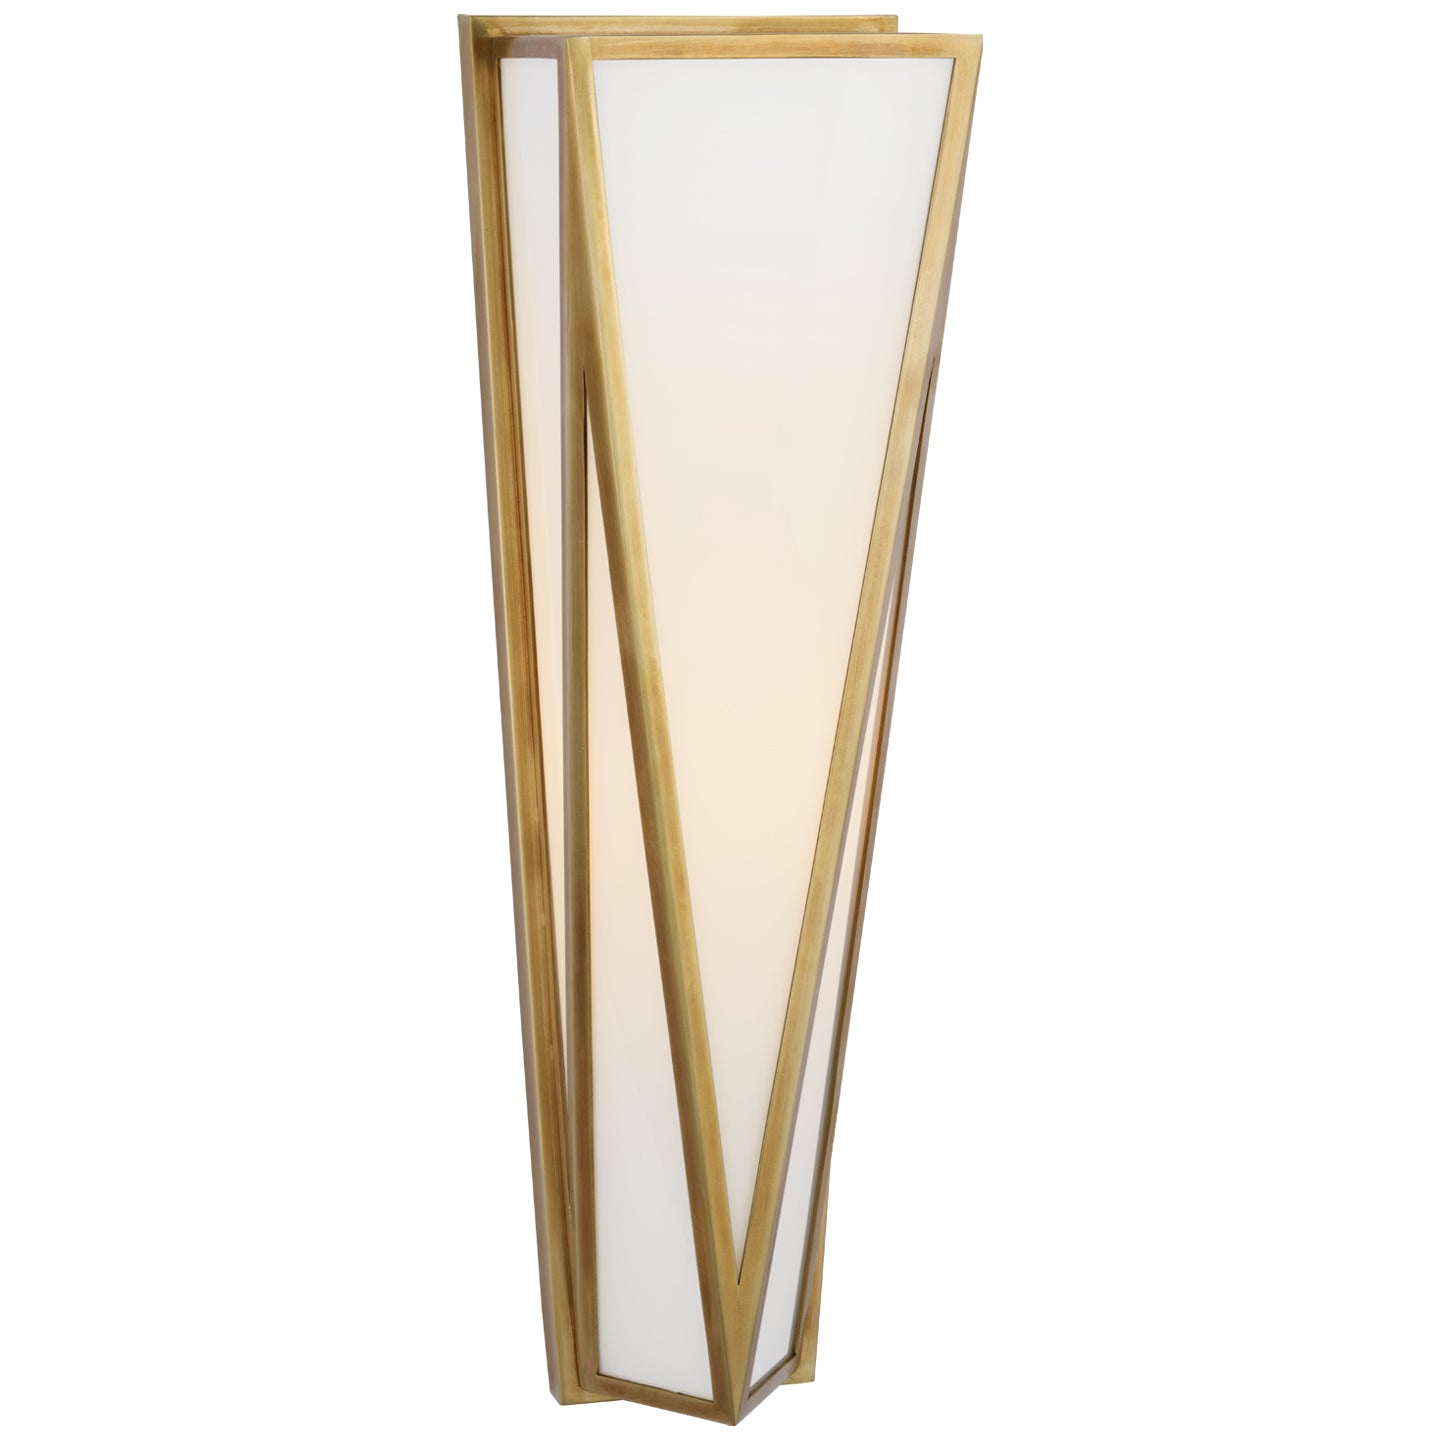 Visual Comfort Signature Canada - LED Wall Sconce - Lorino - Hand-Rubbed Antique Brass- Union Lighting Luminaires Decor